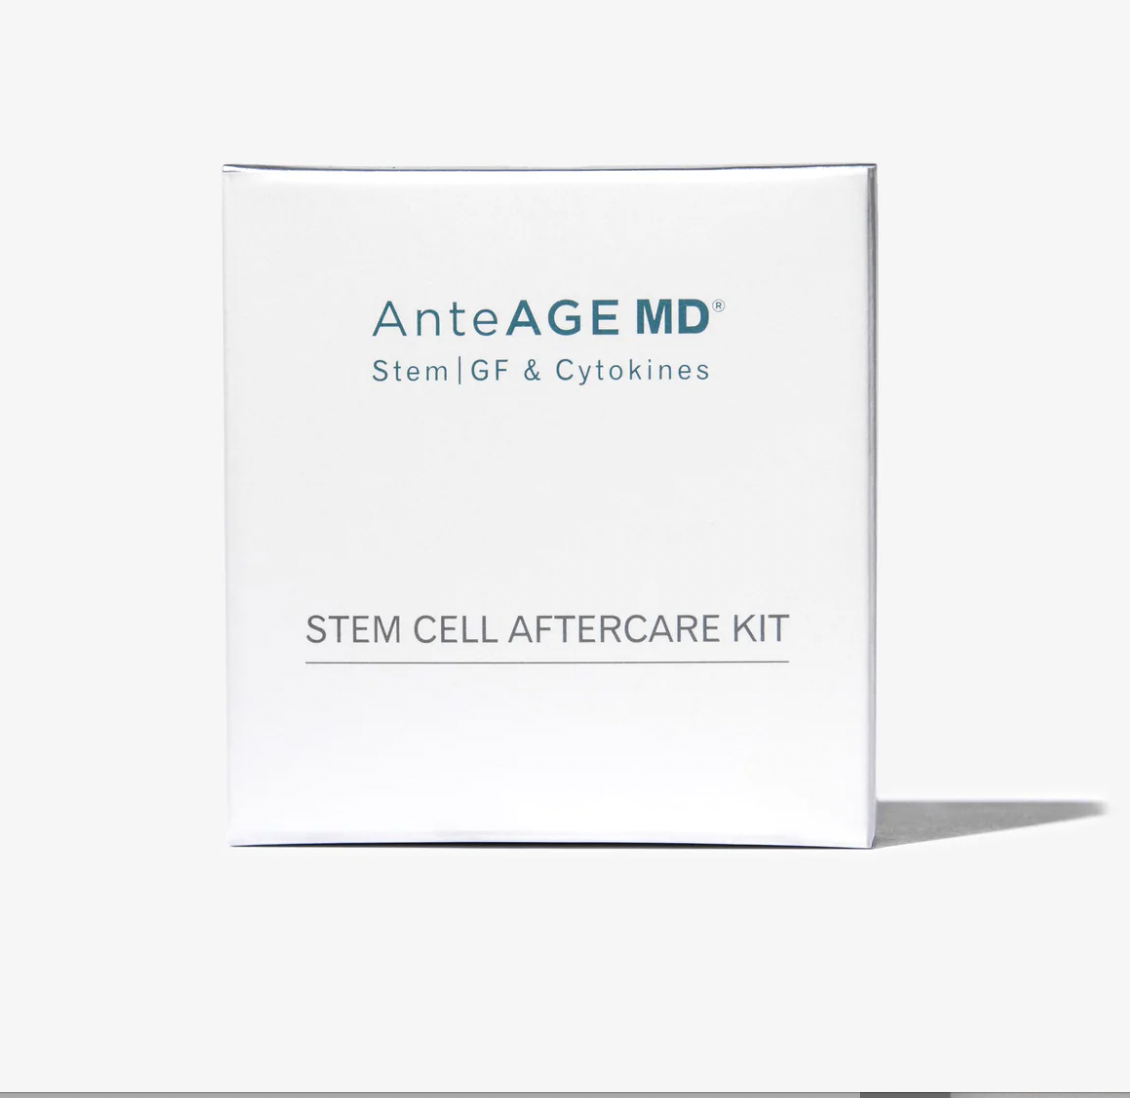 ANTEAGE MD Stem Cell Aftercare Kit